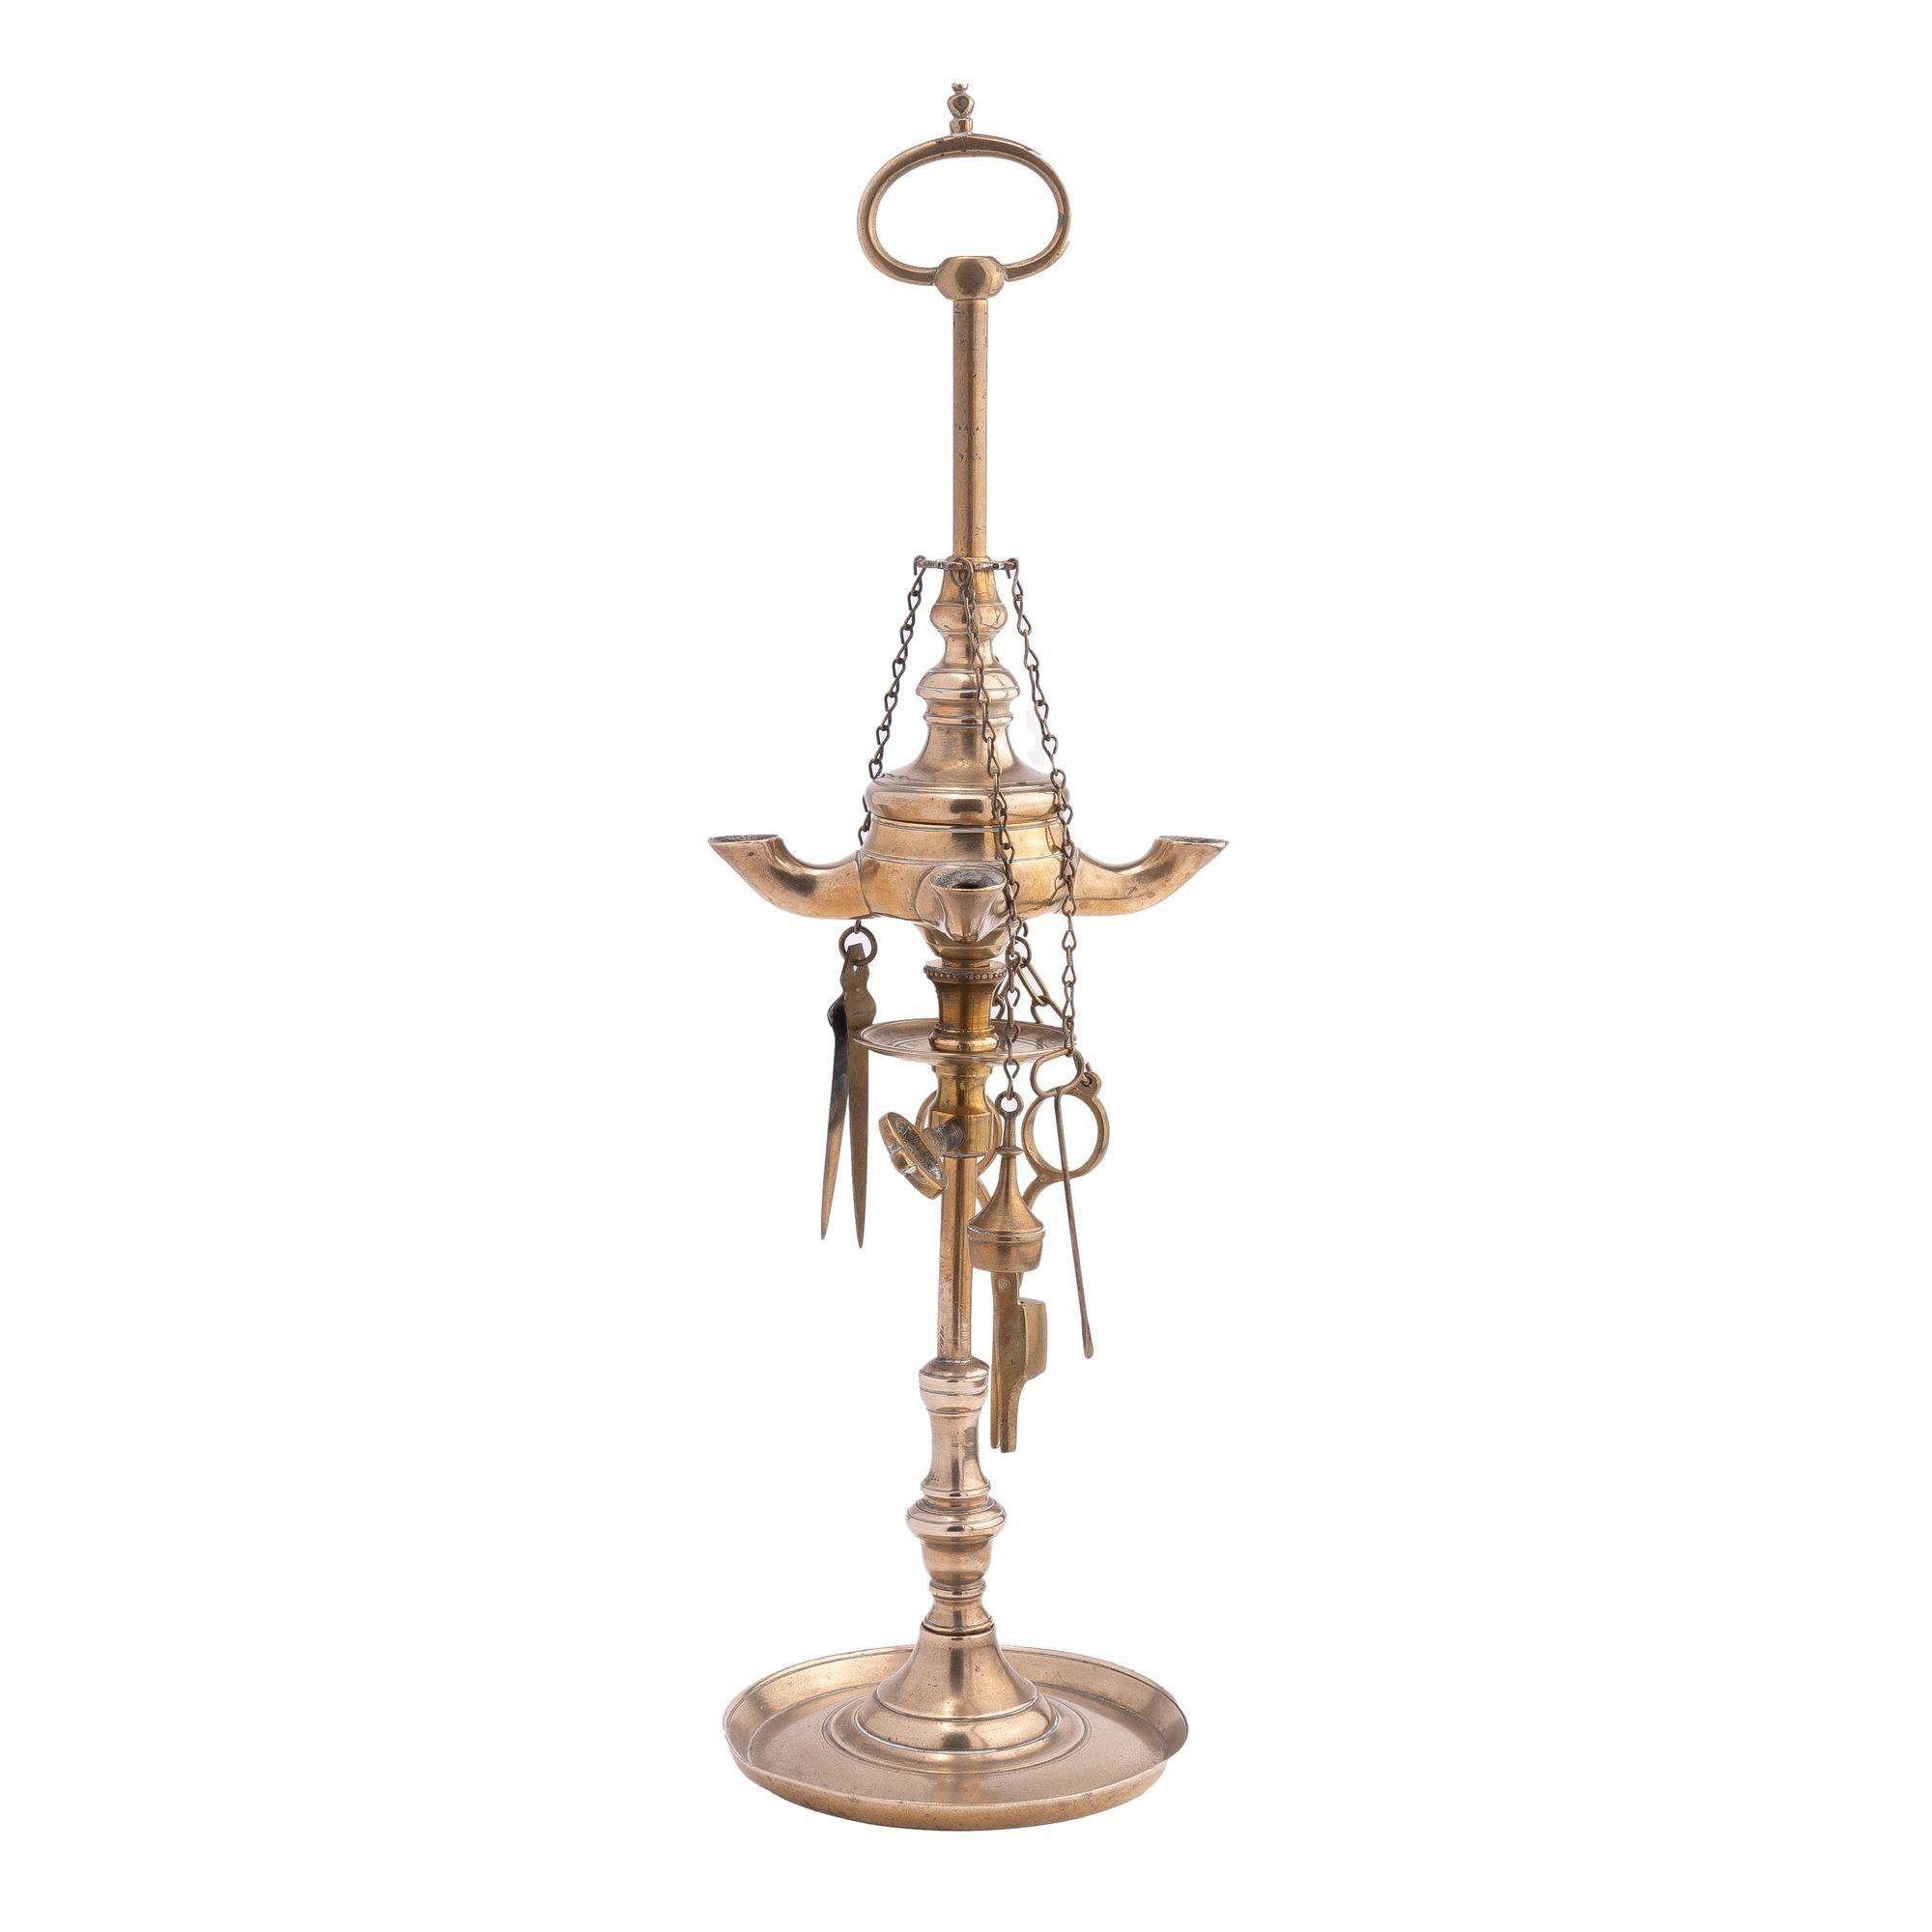 Cast brass four burner Lucerne oil lamp with four hanging wick tools, an adjustable under-font collection dish, and a loop carrying handle at the top of the rod.

Italy, circa 1810.